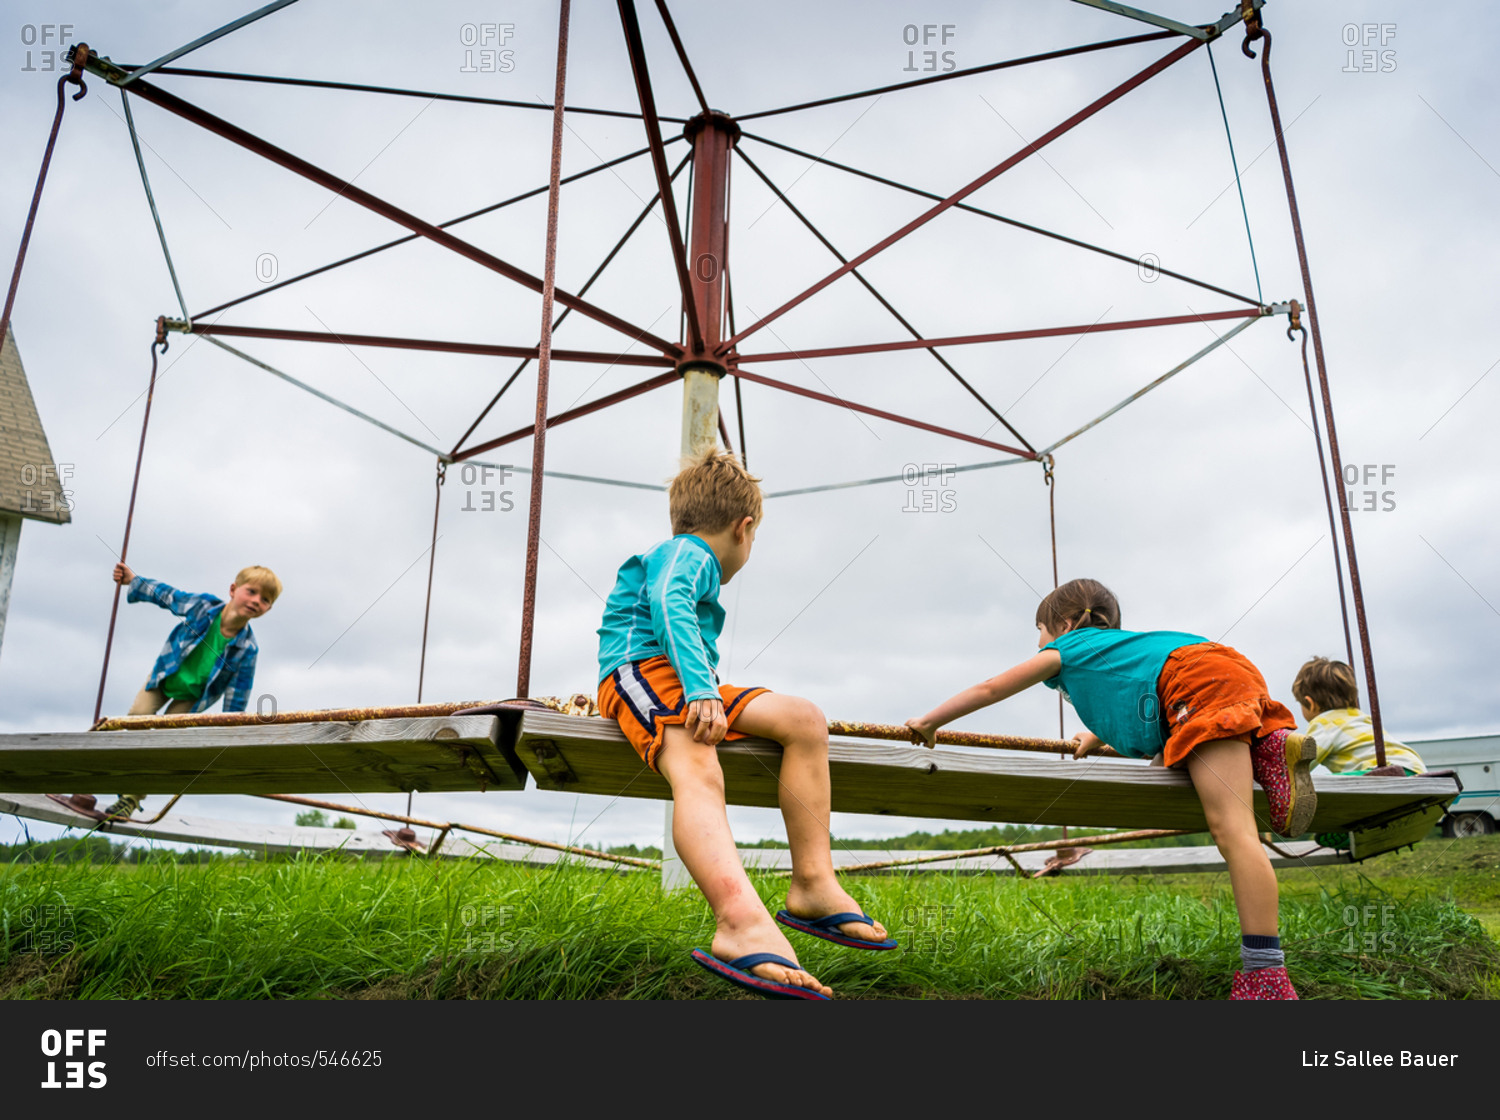 Four kids playing on old playground equipment